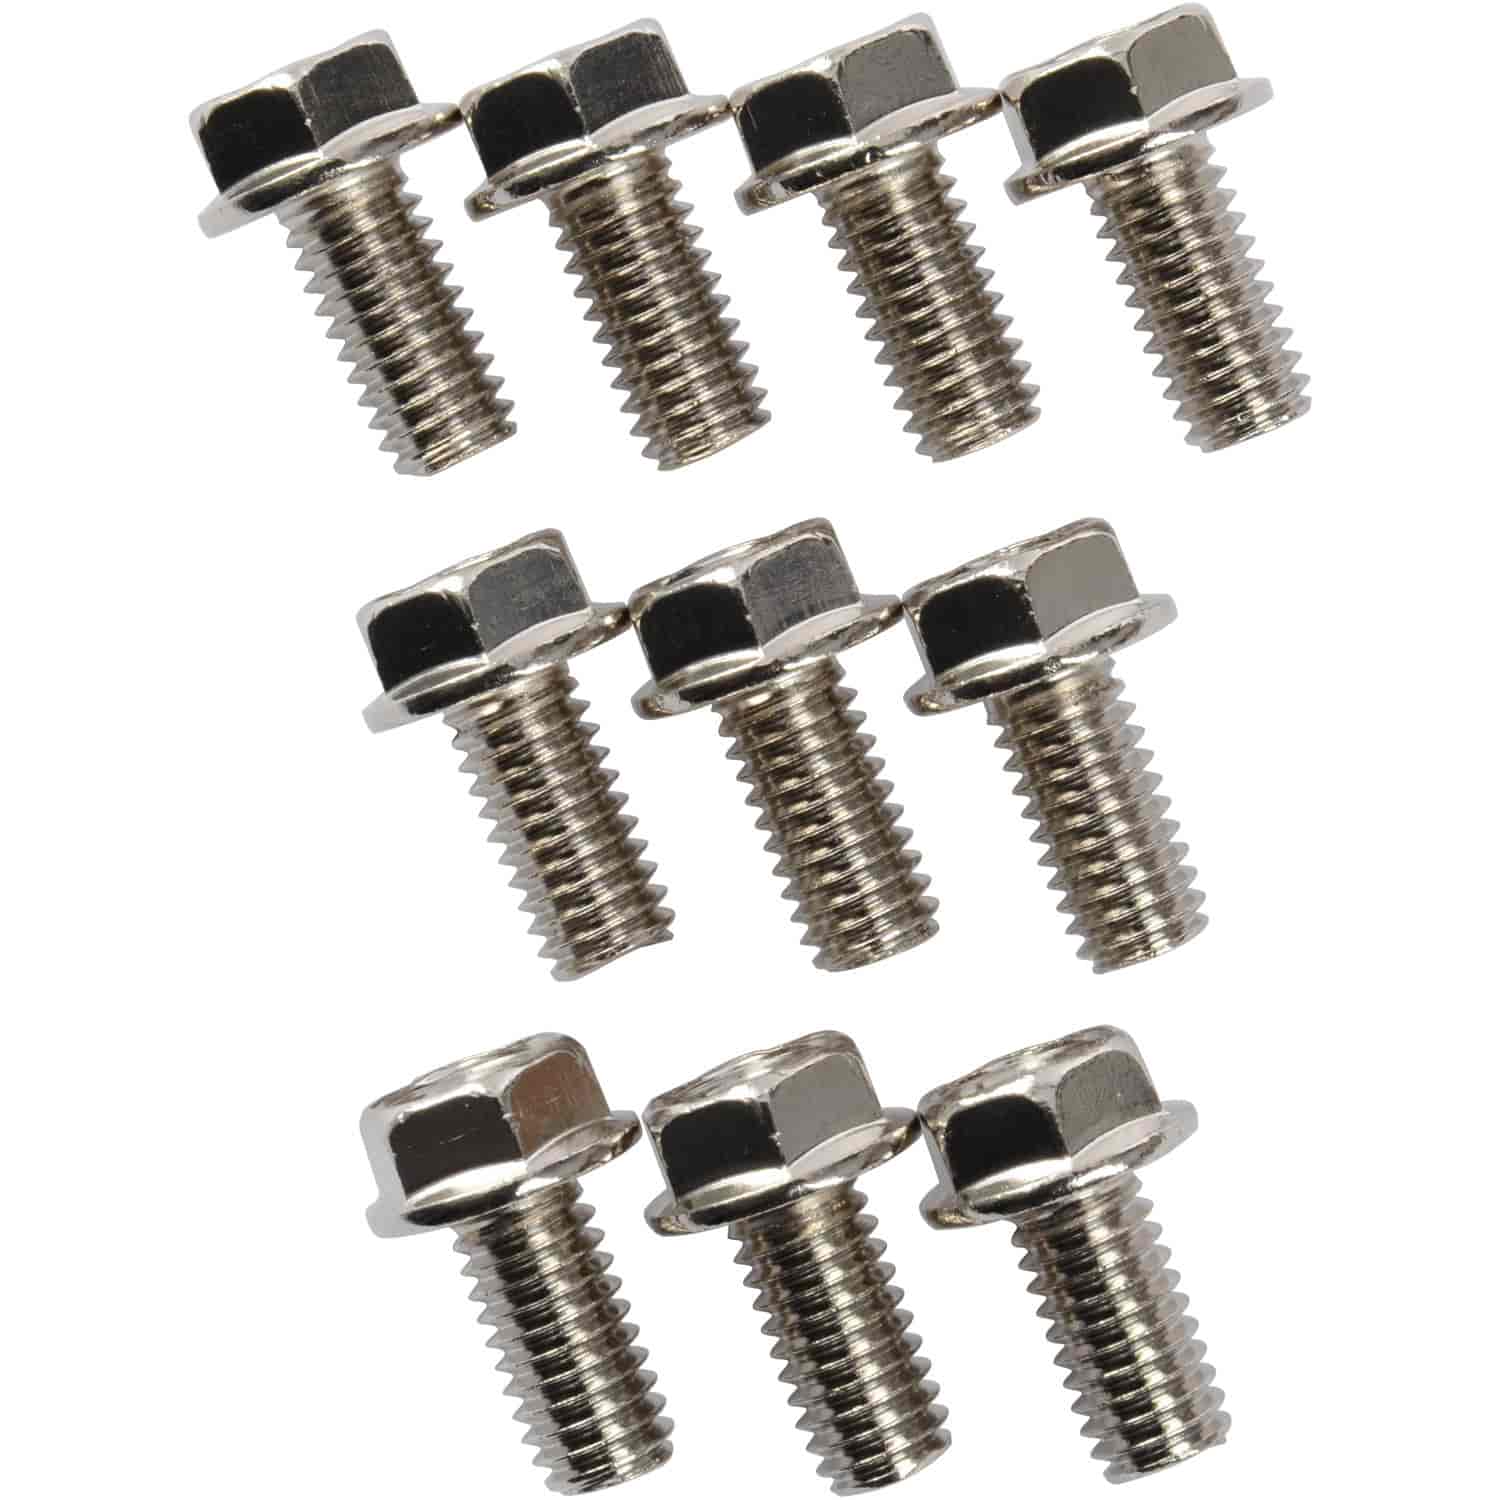 Zinc-Plated Differential Cover Bolts 3/8"-16 x 3/4"